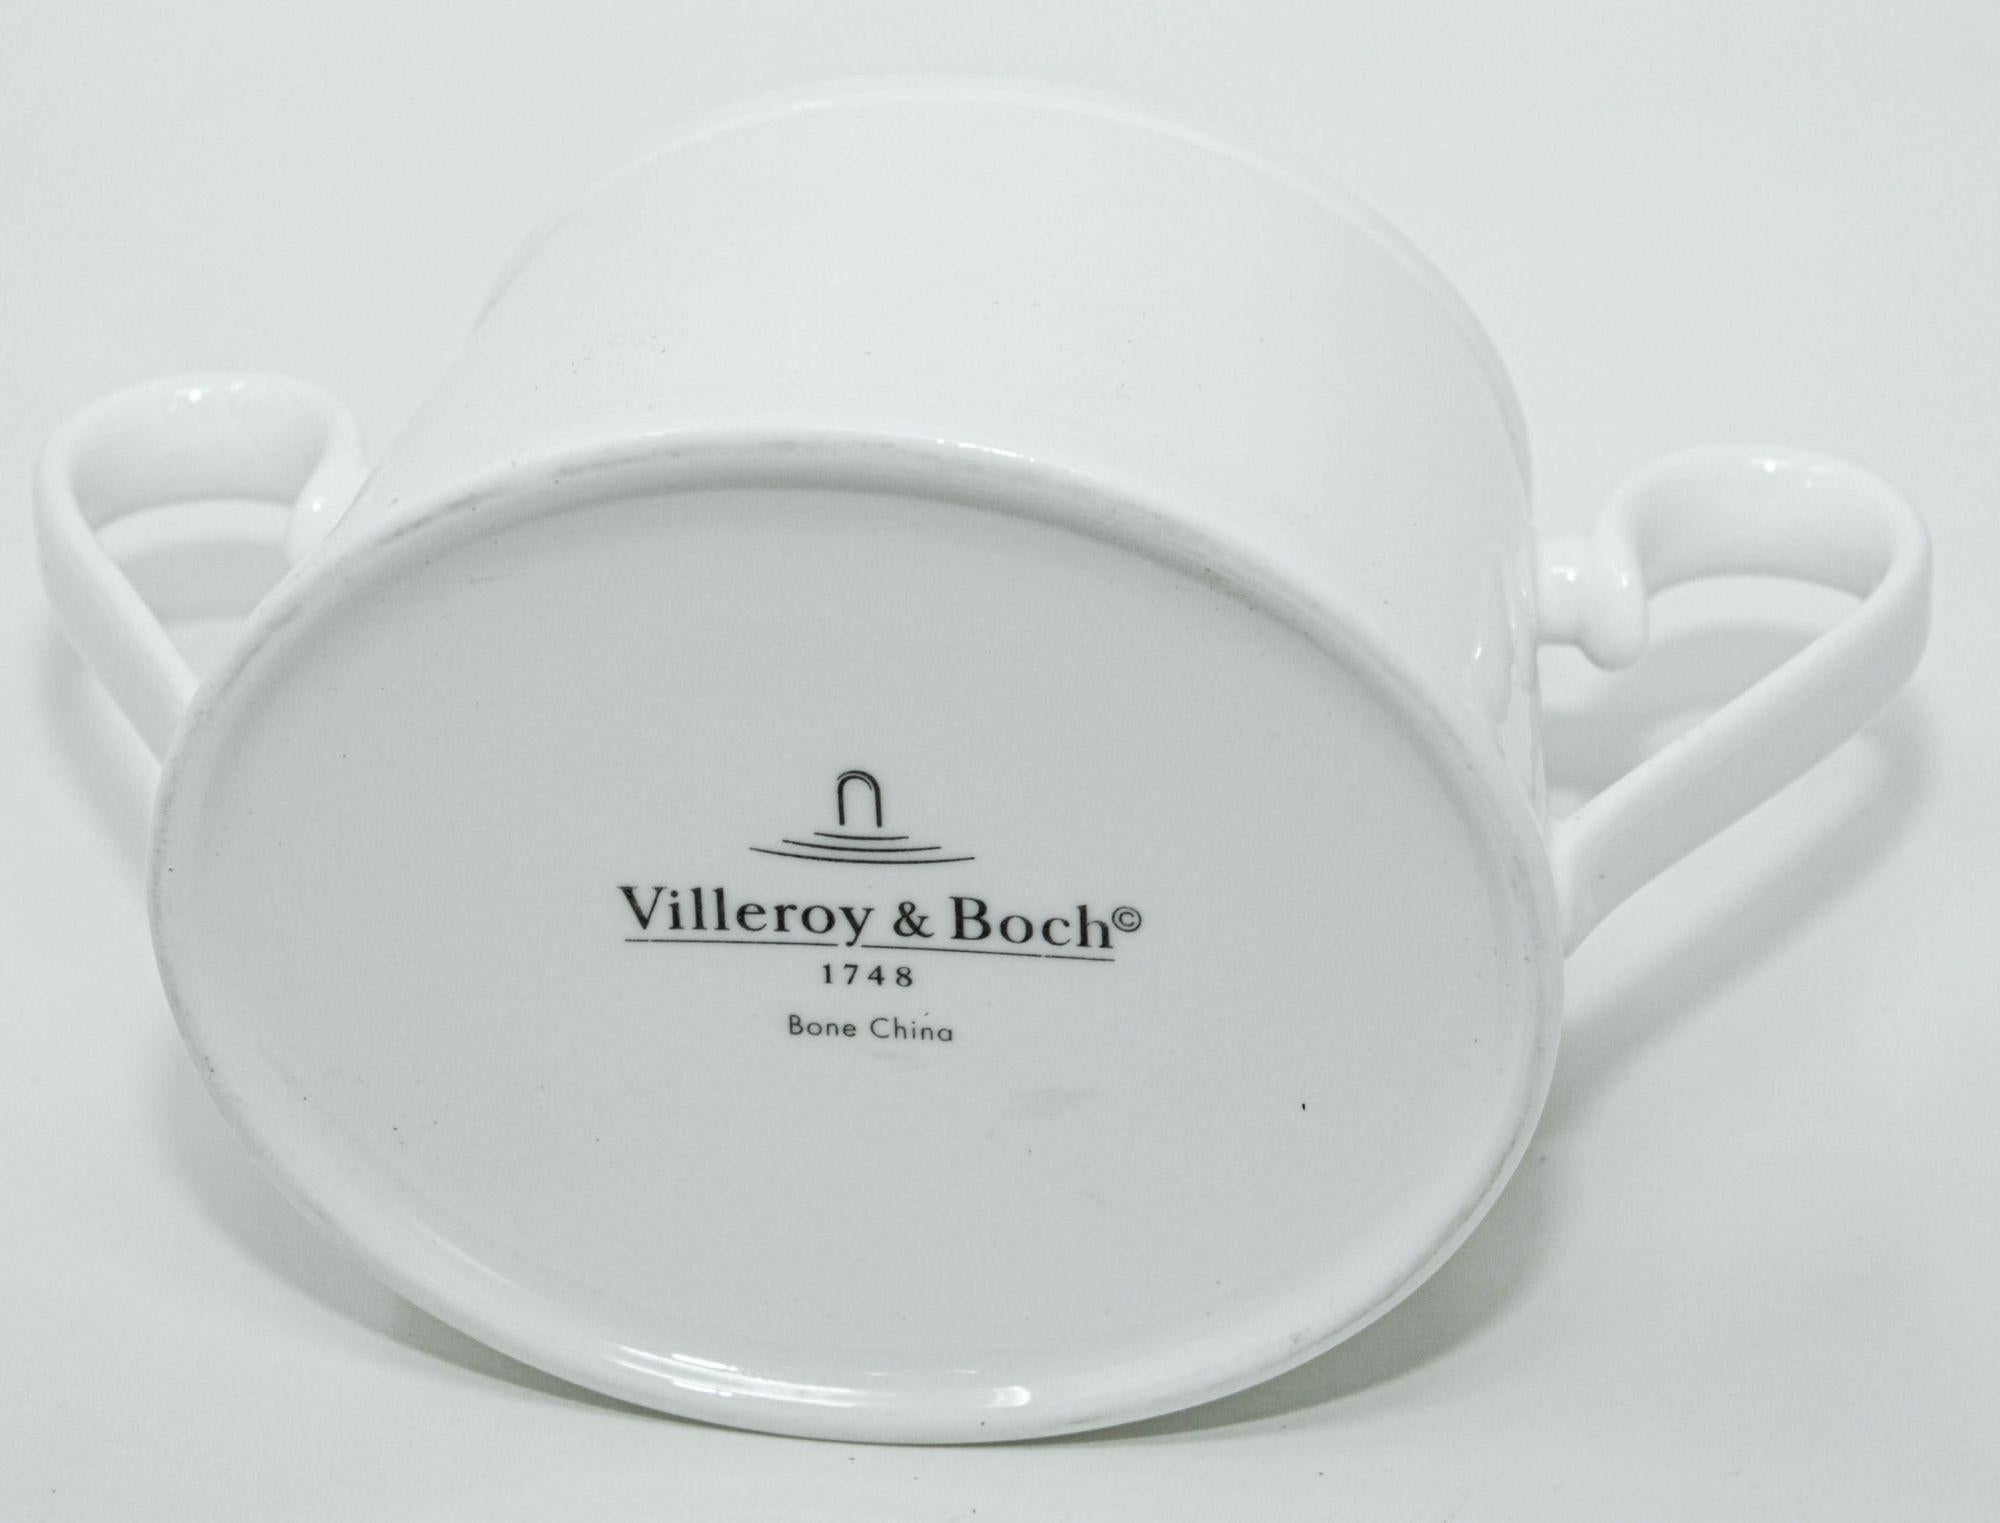 Villeroy & Boch Stella Hotel white Bone China Sugar Bowl with Cover For Sale 2